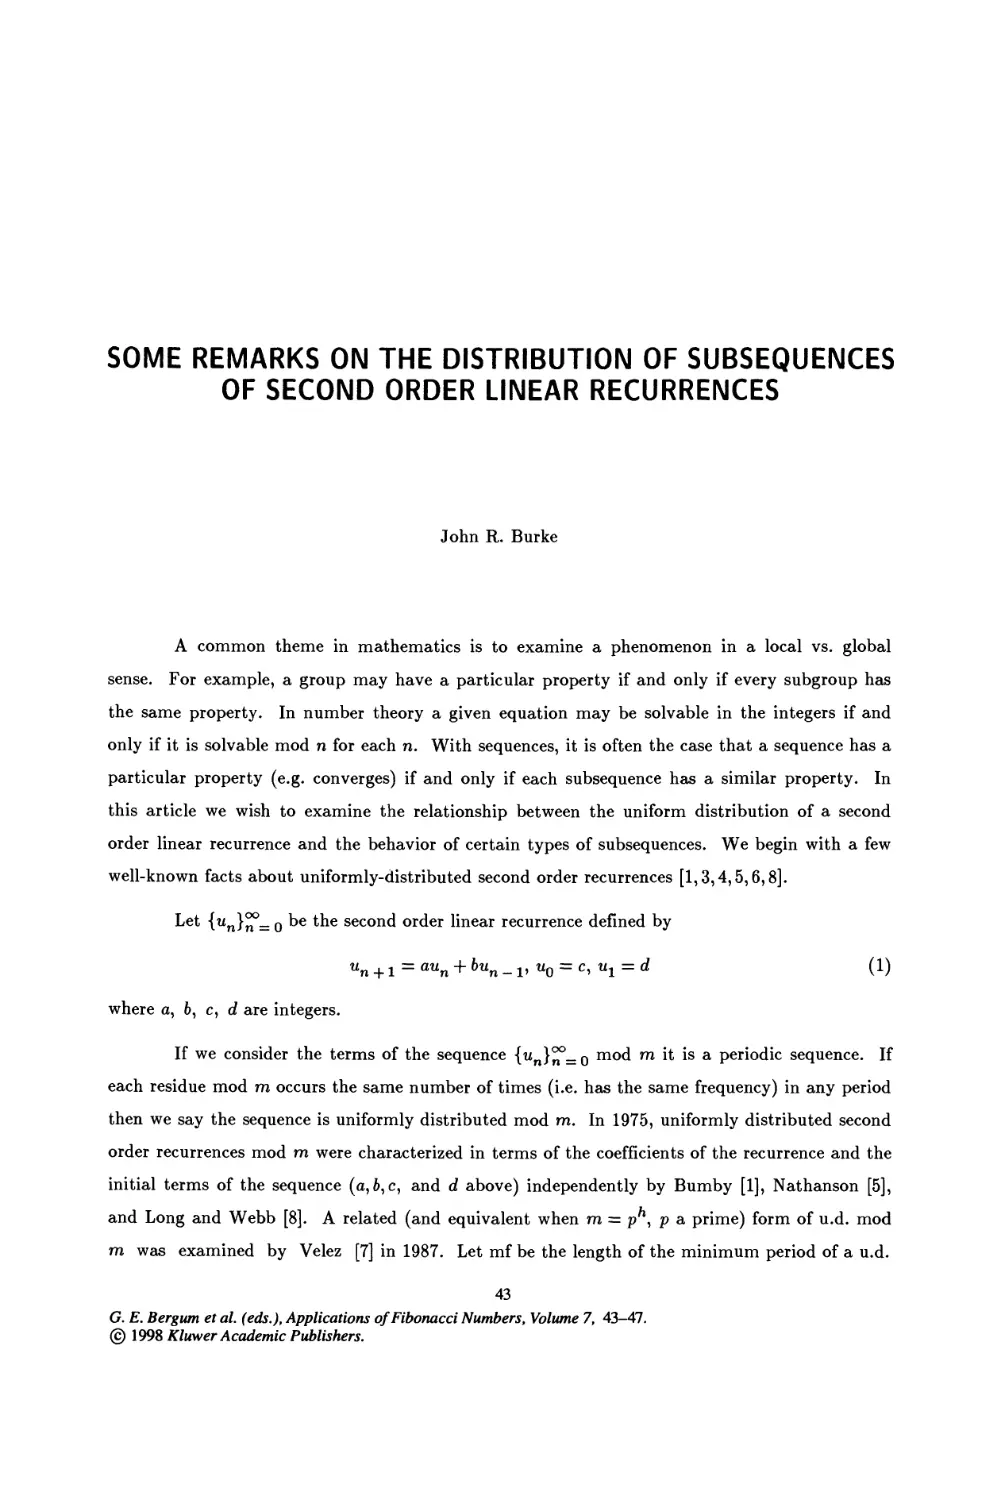 7. Some Remarks on The Distribution of Subsequences of Second Order Linear Recurrences